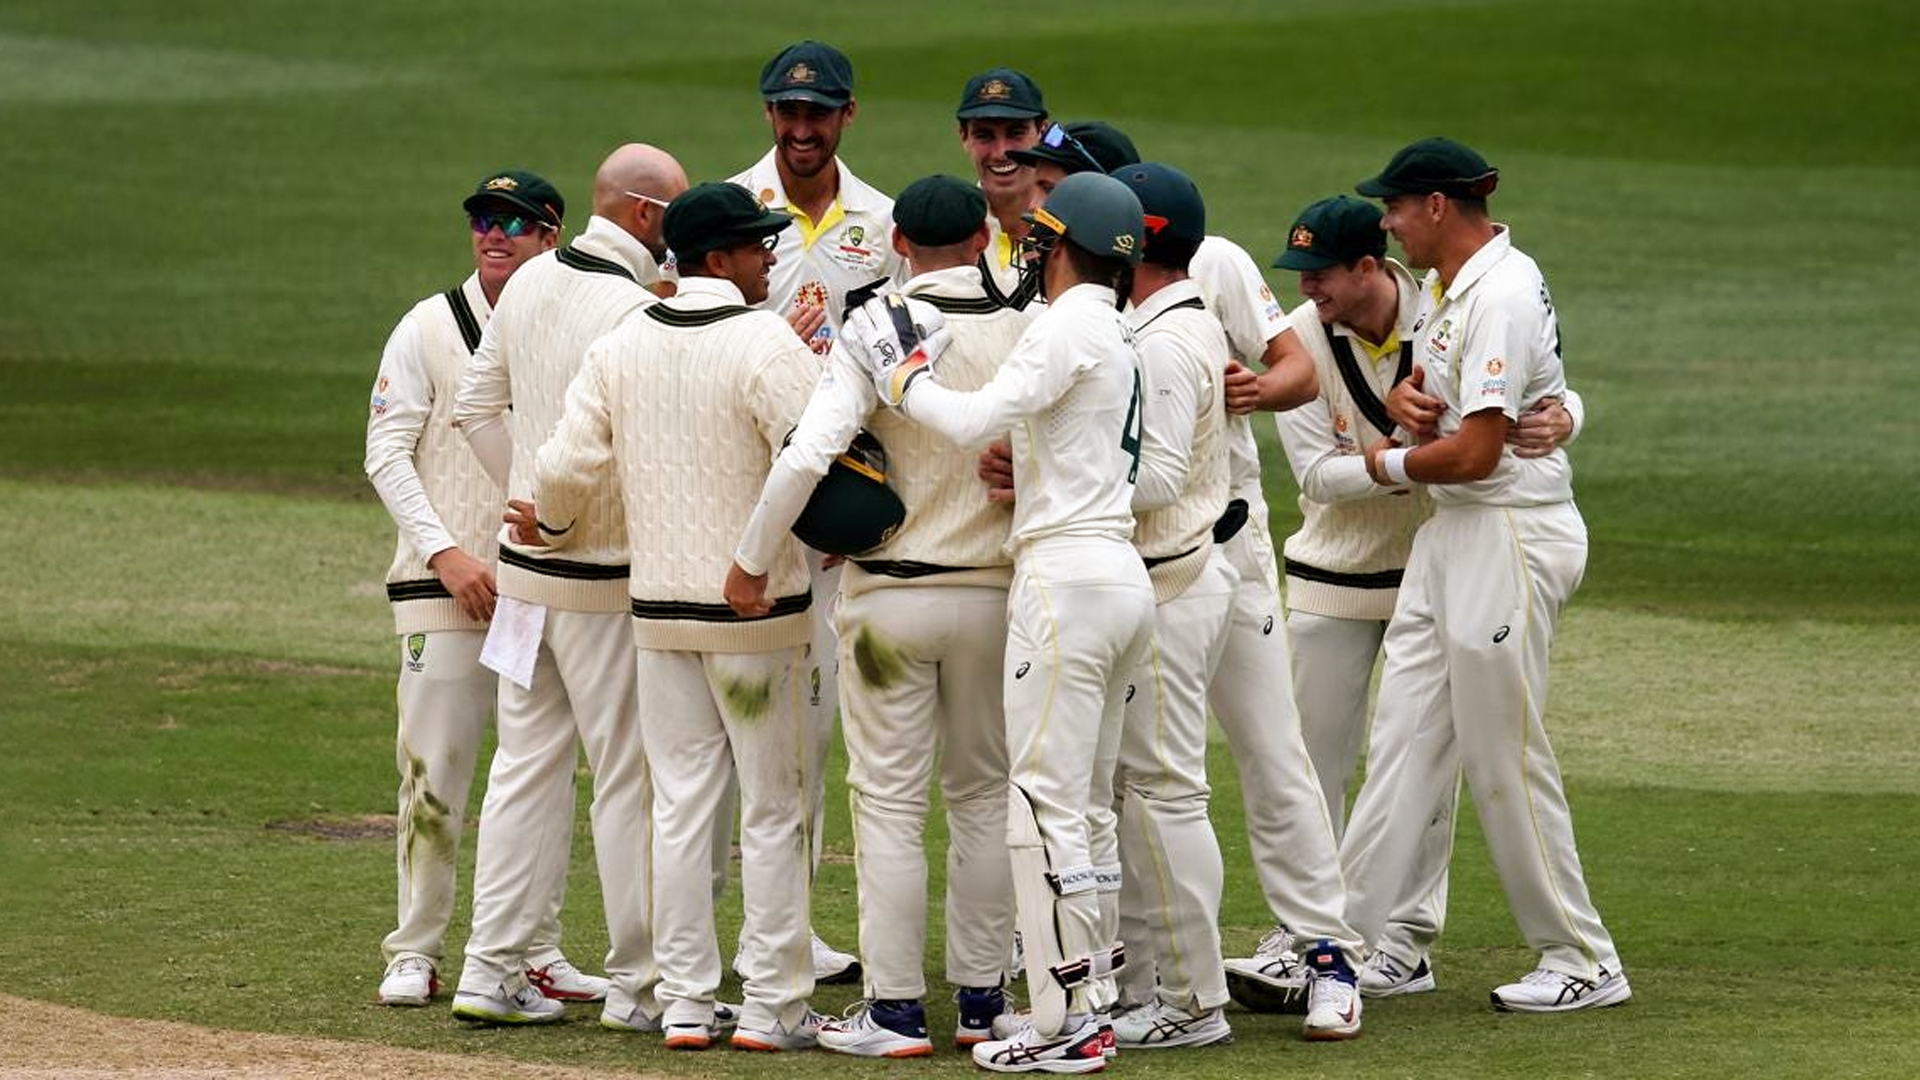 Premium Australian Test Player Didn't Catch The Flight For India; Check The Full Report